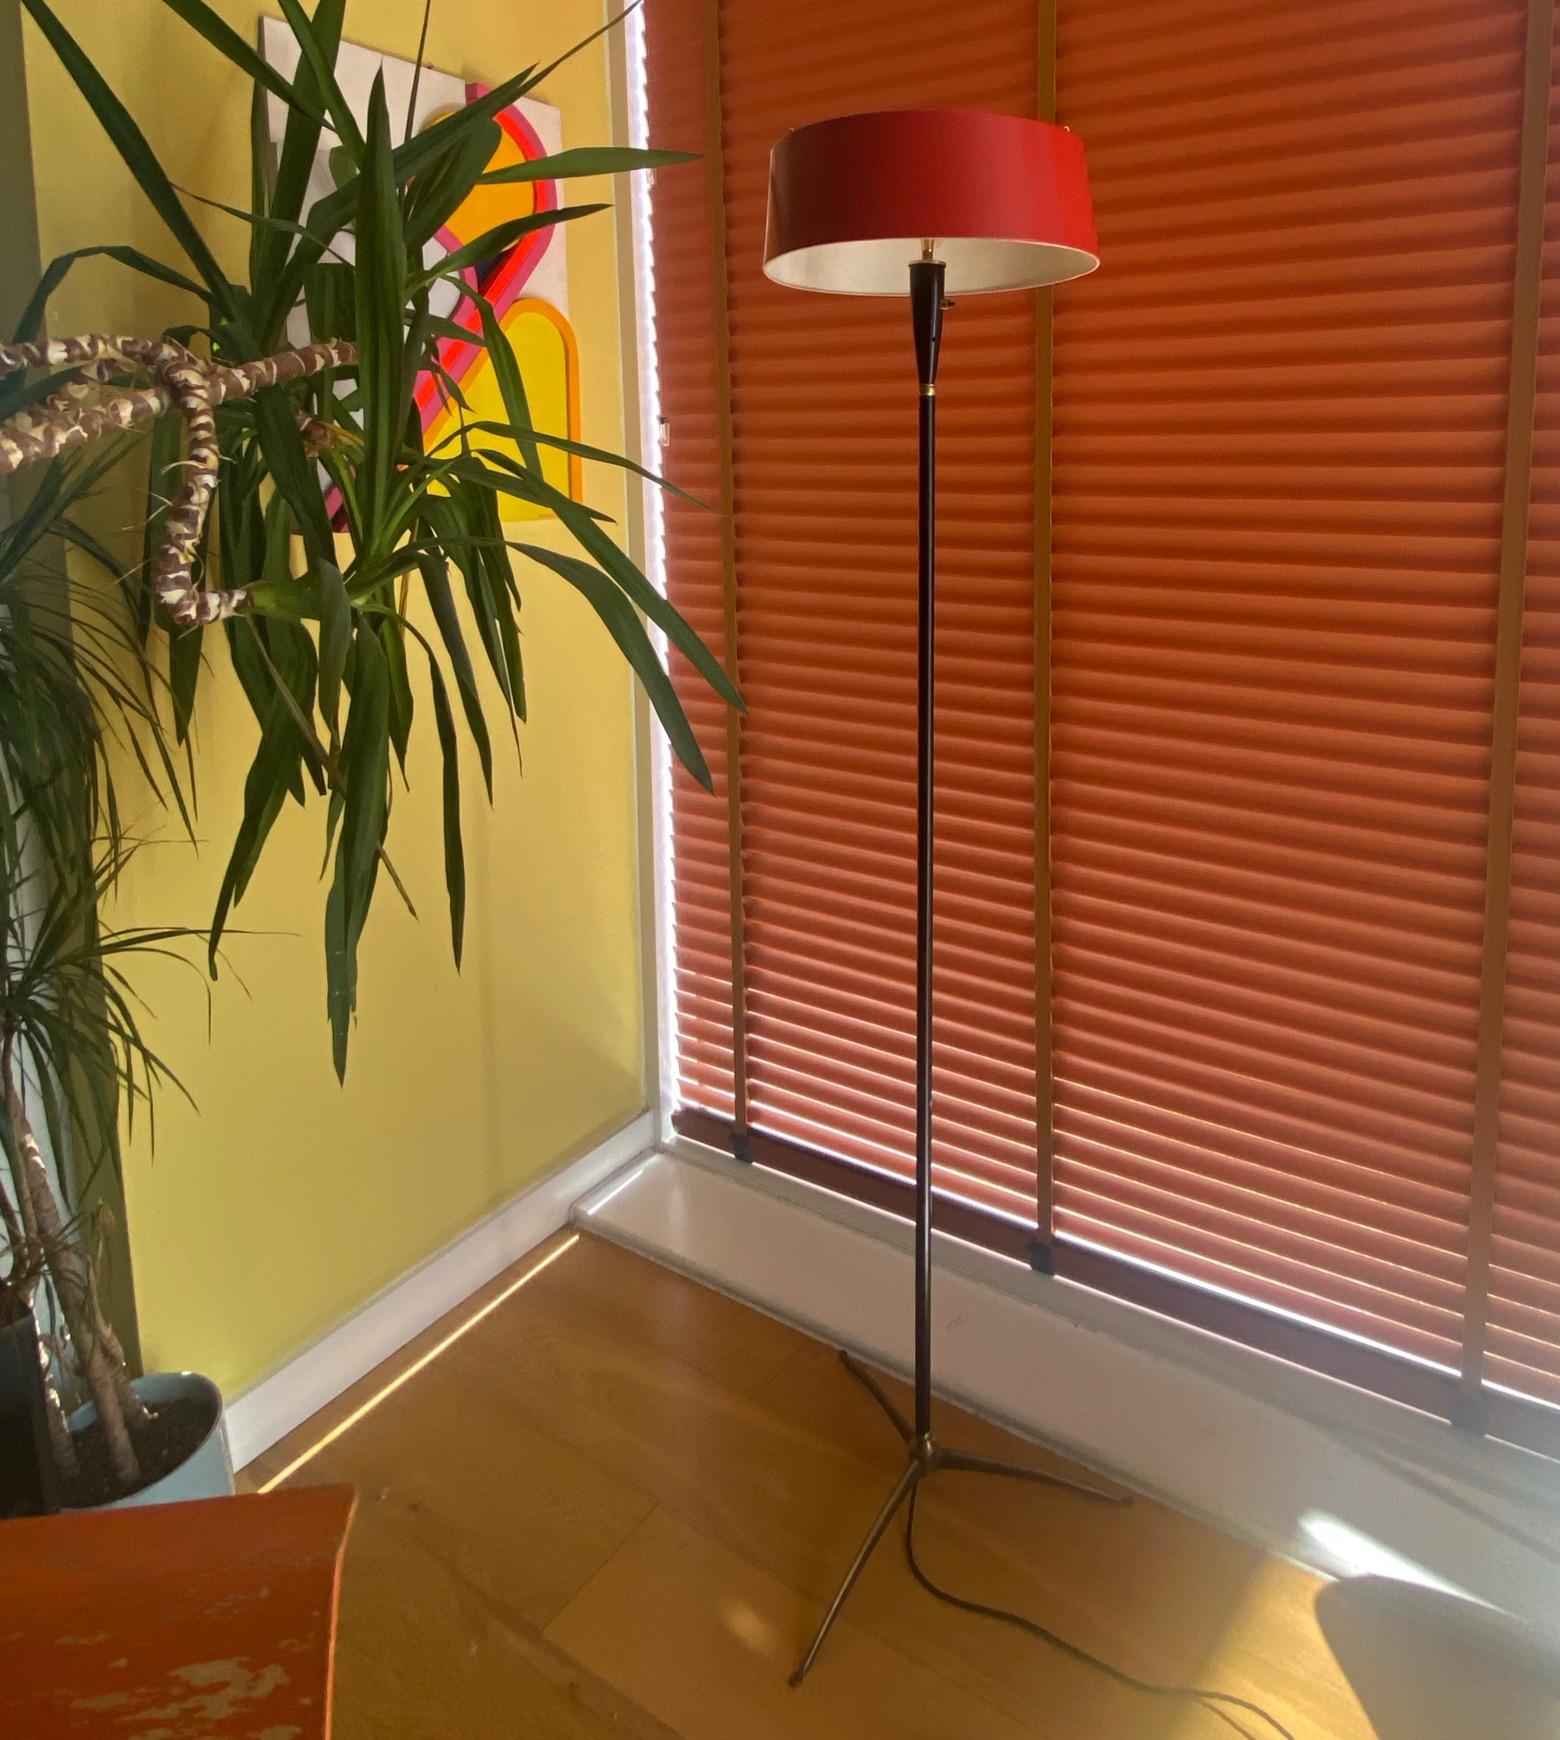 This is an unusual, stylish Italian floor lamp from the 1950's. It is very similar to the designs of Oscar Torlasco for Lumi. The red shade can be tilted in all directions which is quite fun and practical. The brass lightbulb holders are really